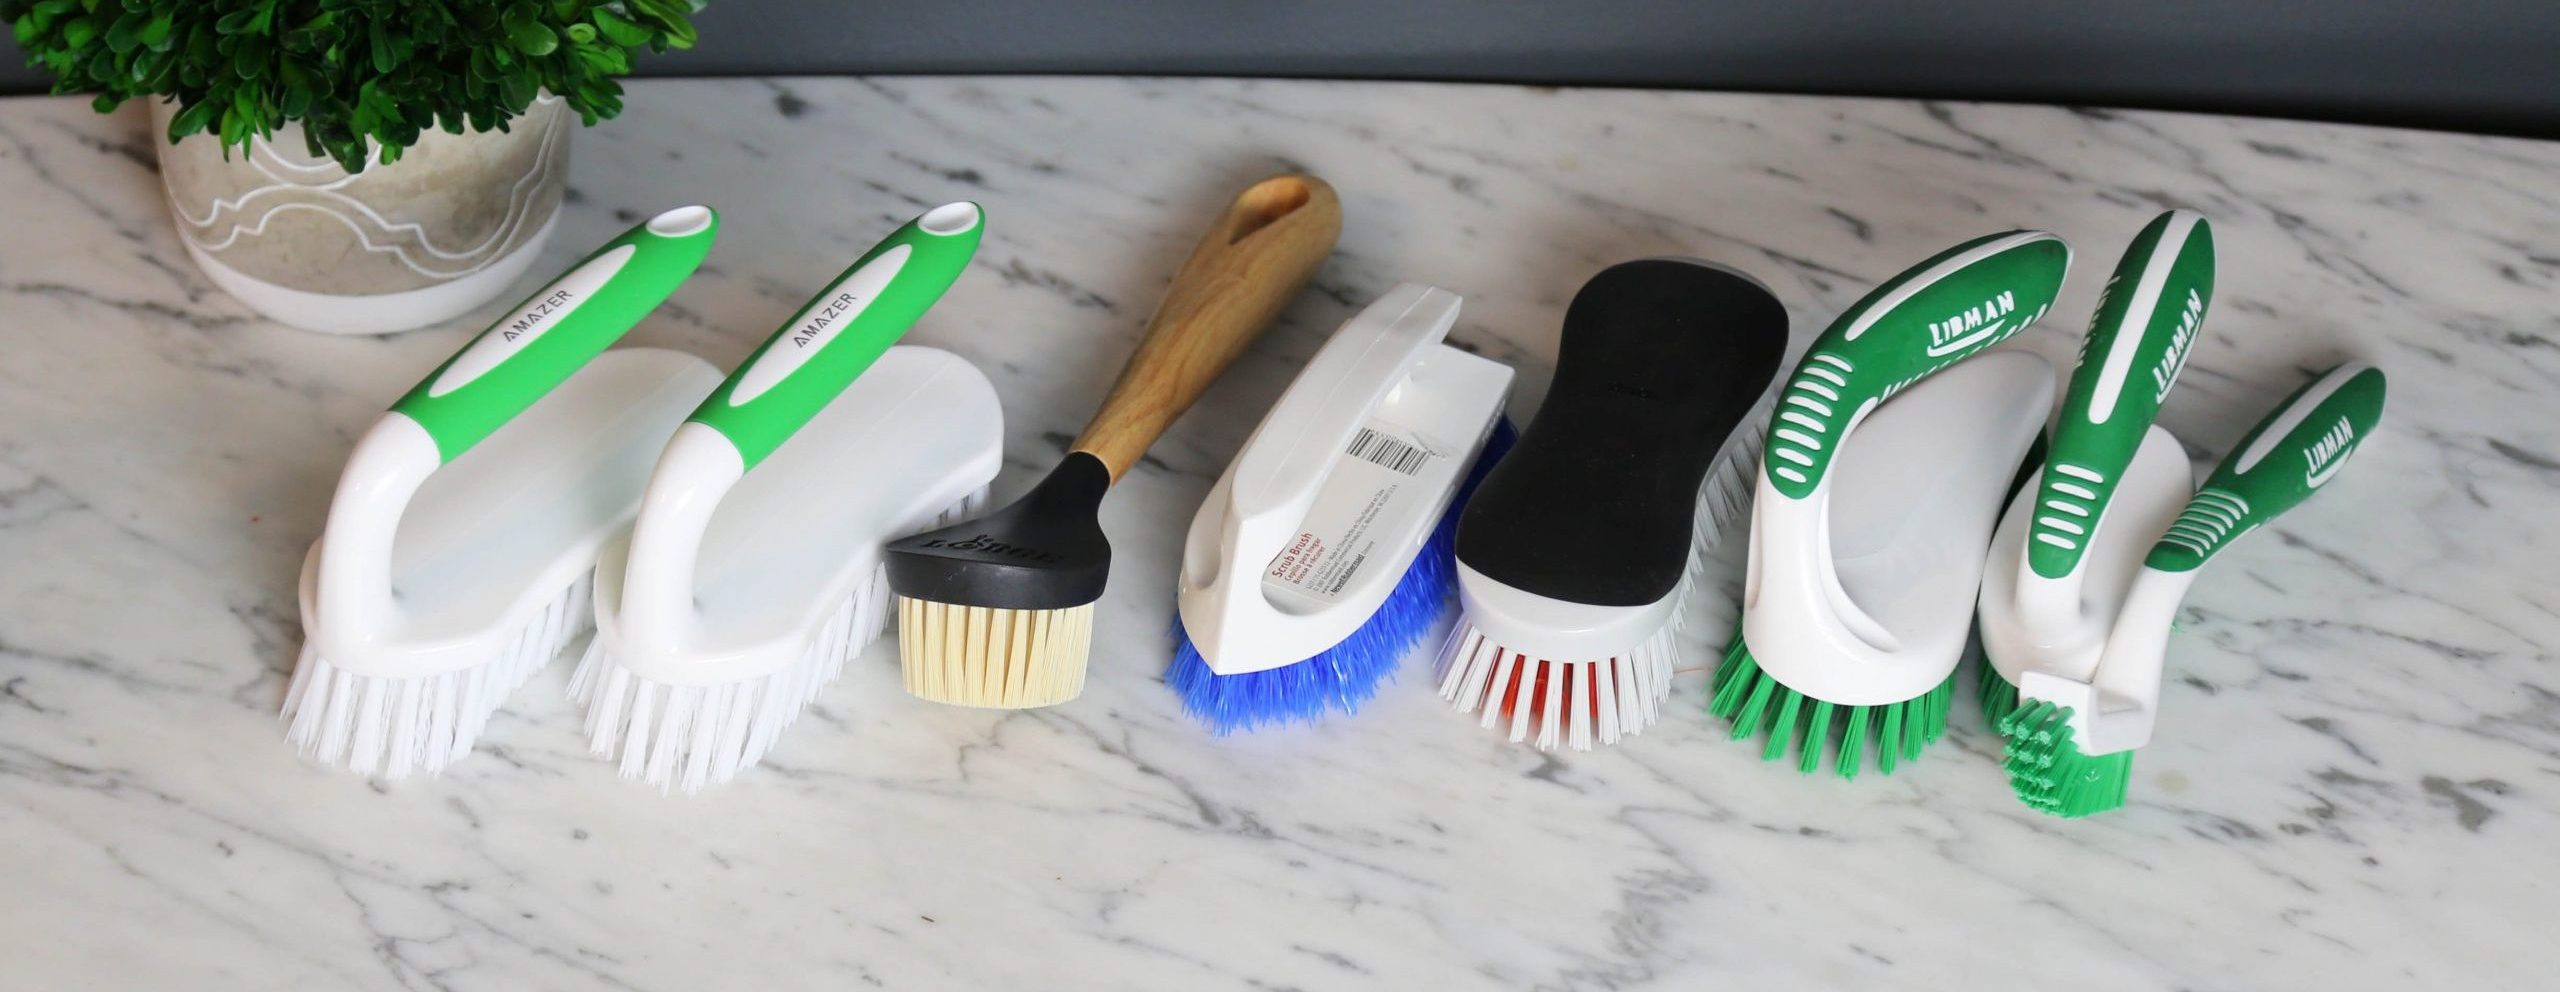 The Best Scrub Brush on , According to Reviewers